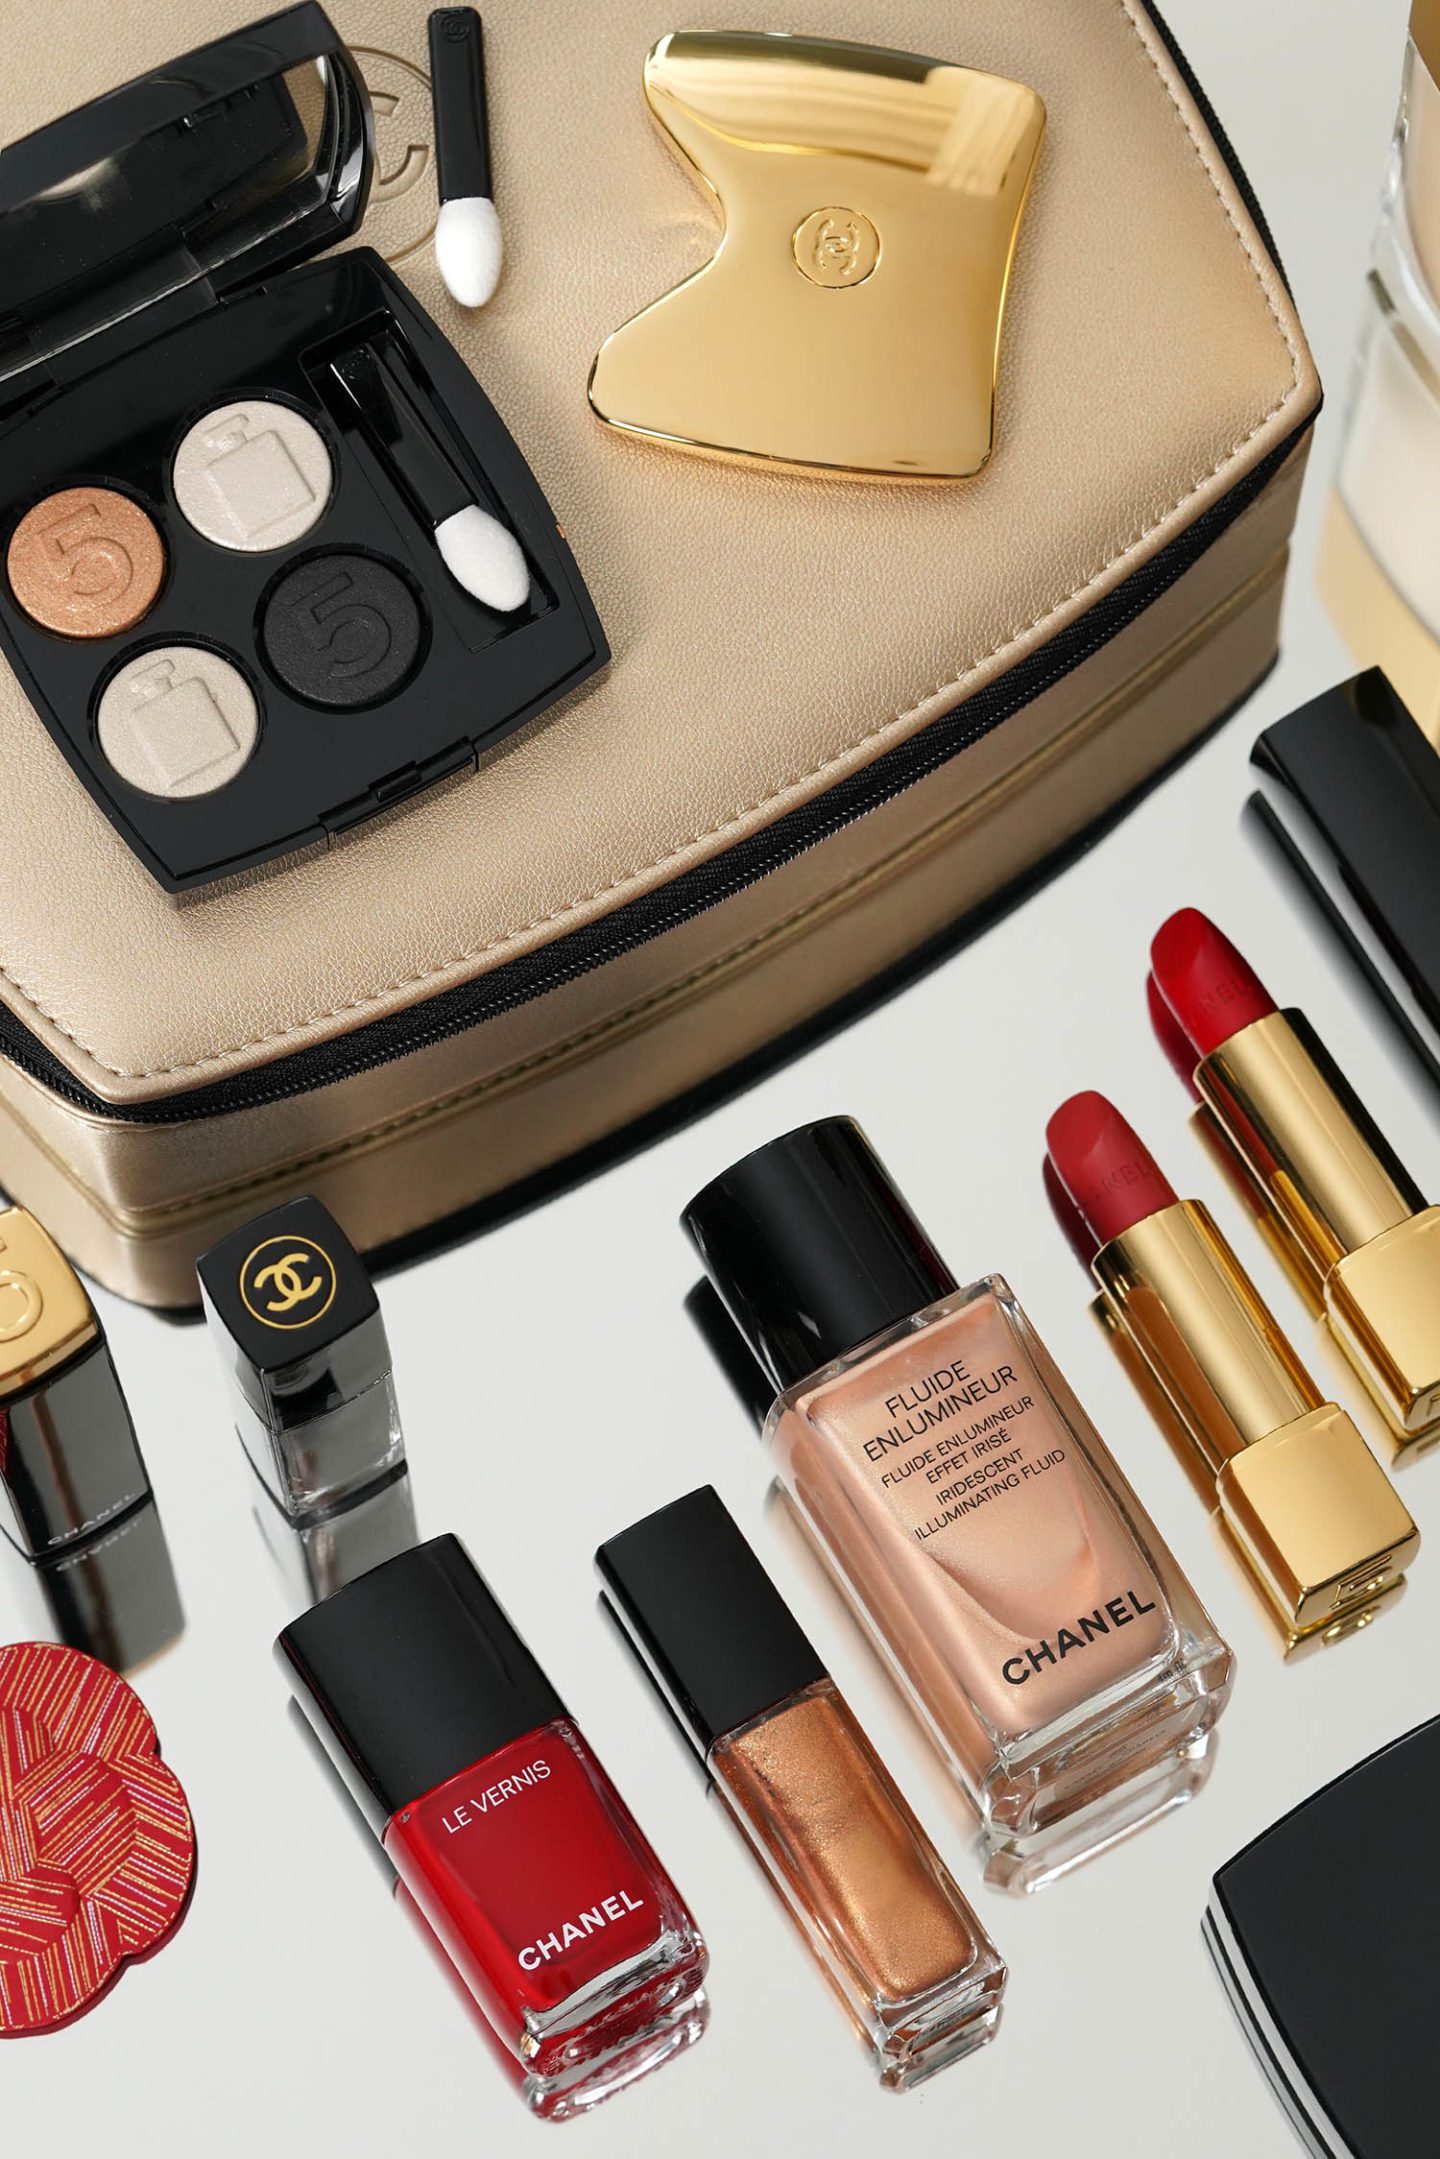 Chanel Holiday 2021 No 5 Makeup Collection